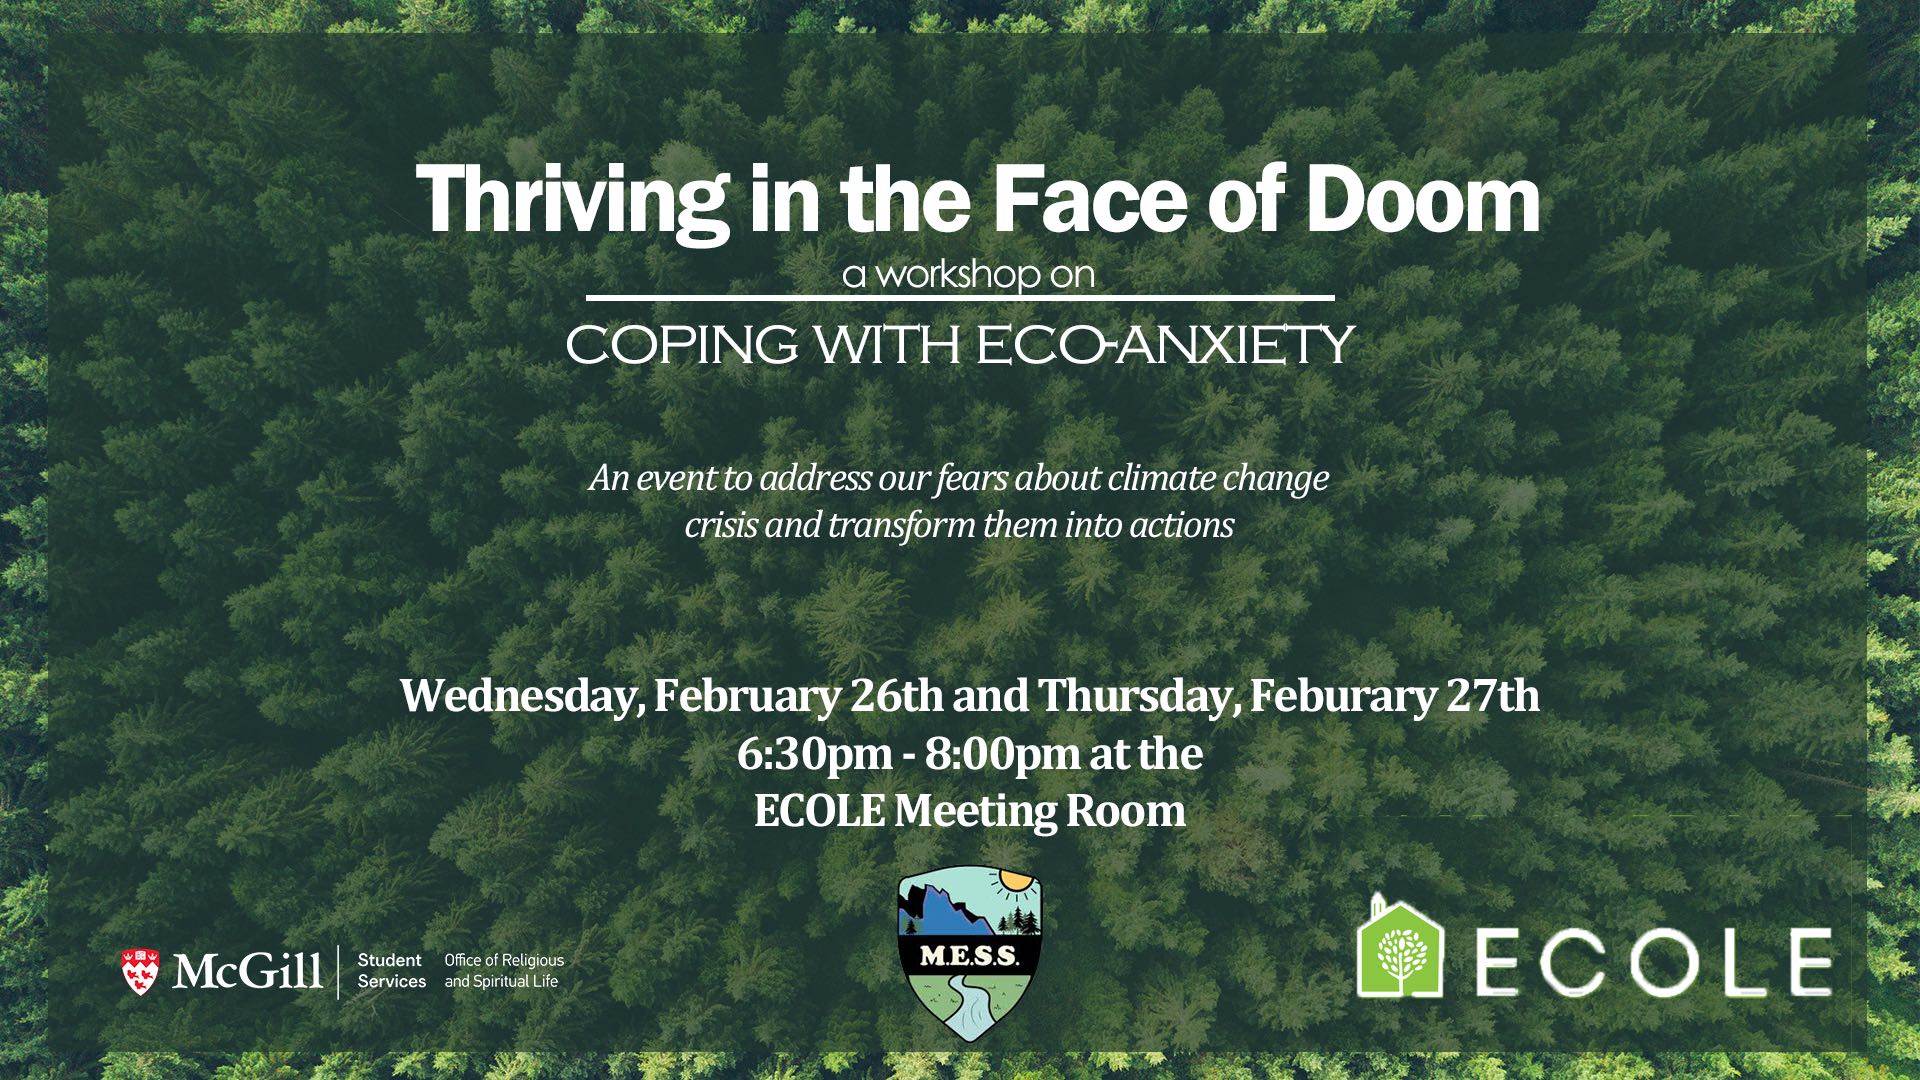 Thriving in the Face of Doom: A Workshop on Coping with Eco-Anxiety